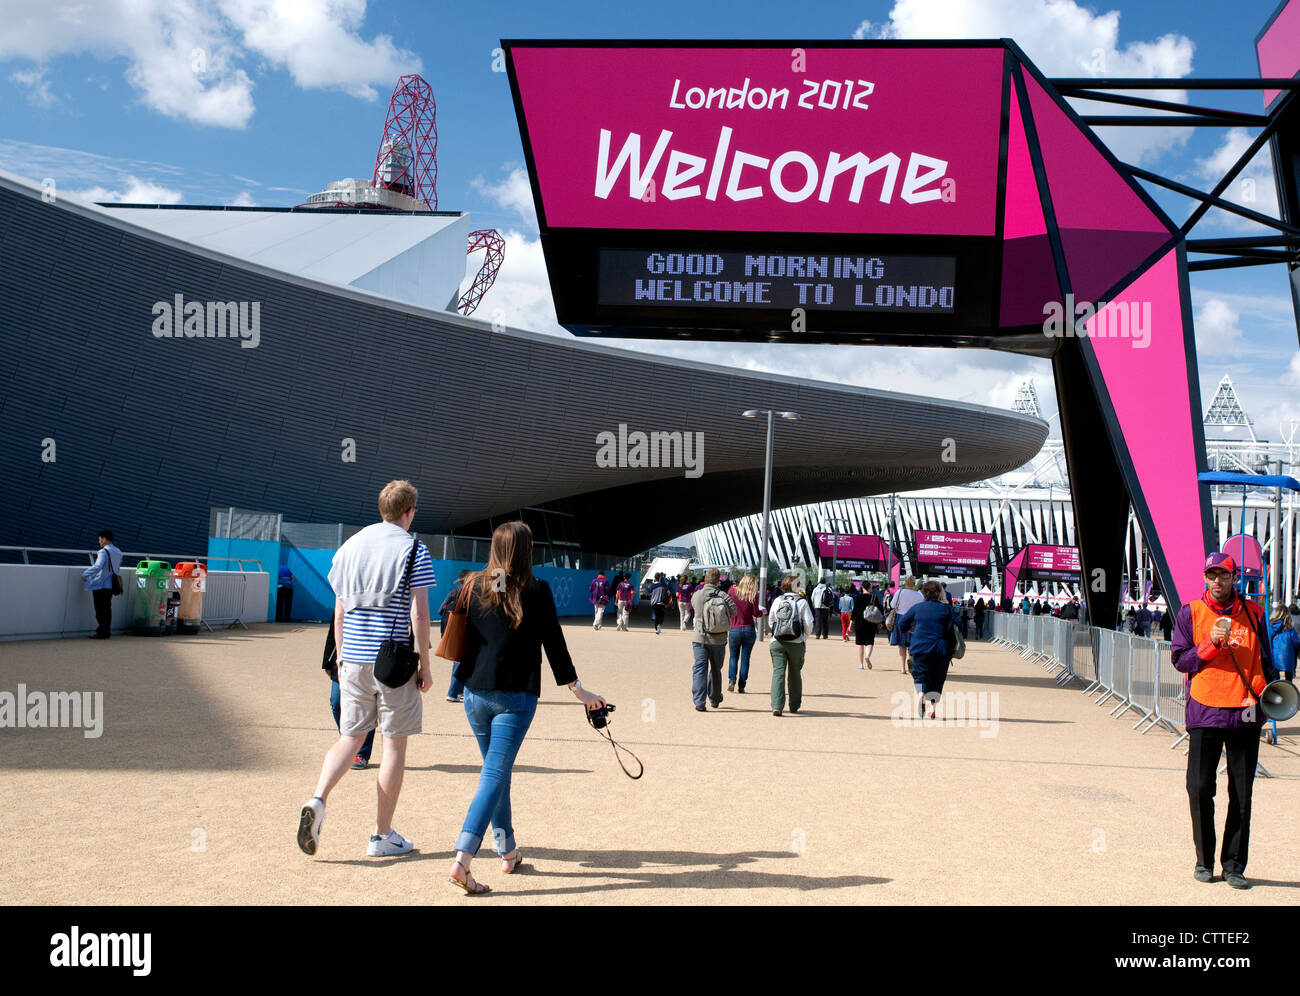 London 2012 Olympic Games - Welcome sign at entrance to Olympic Park Stock Photo